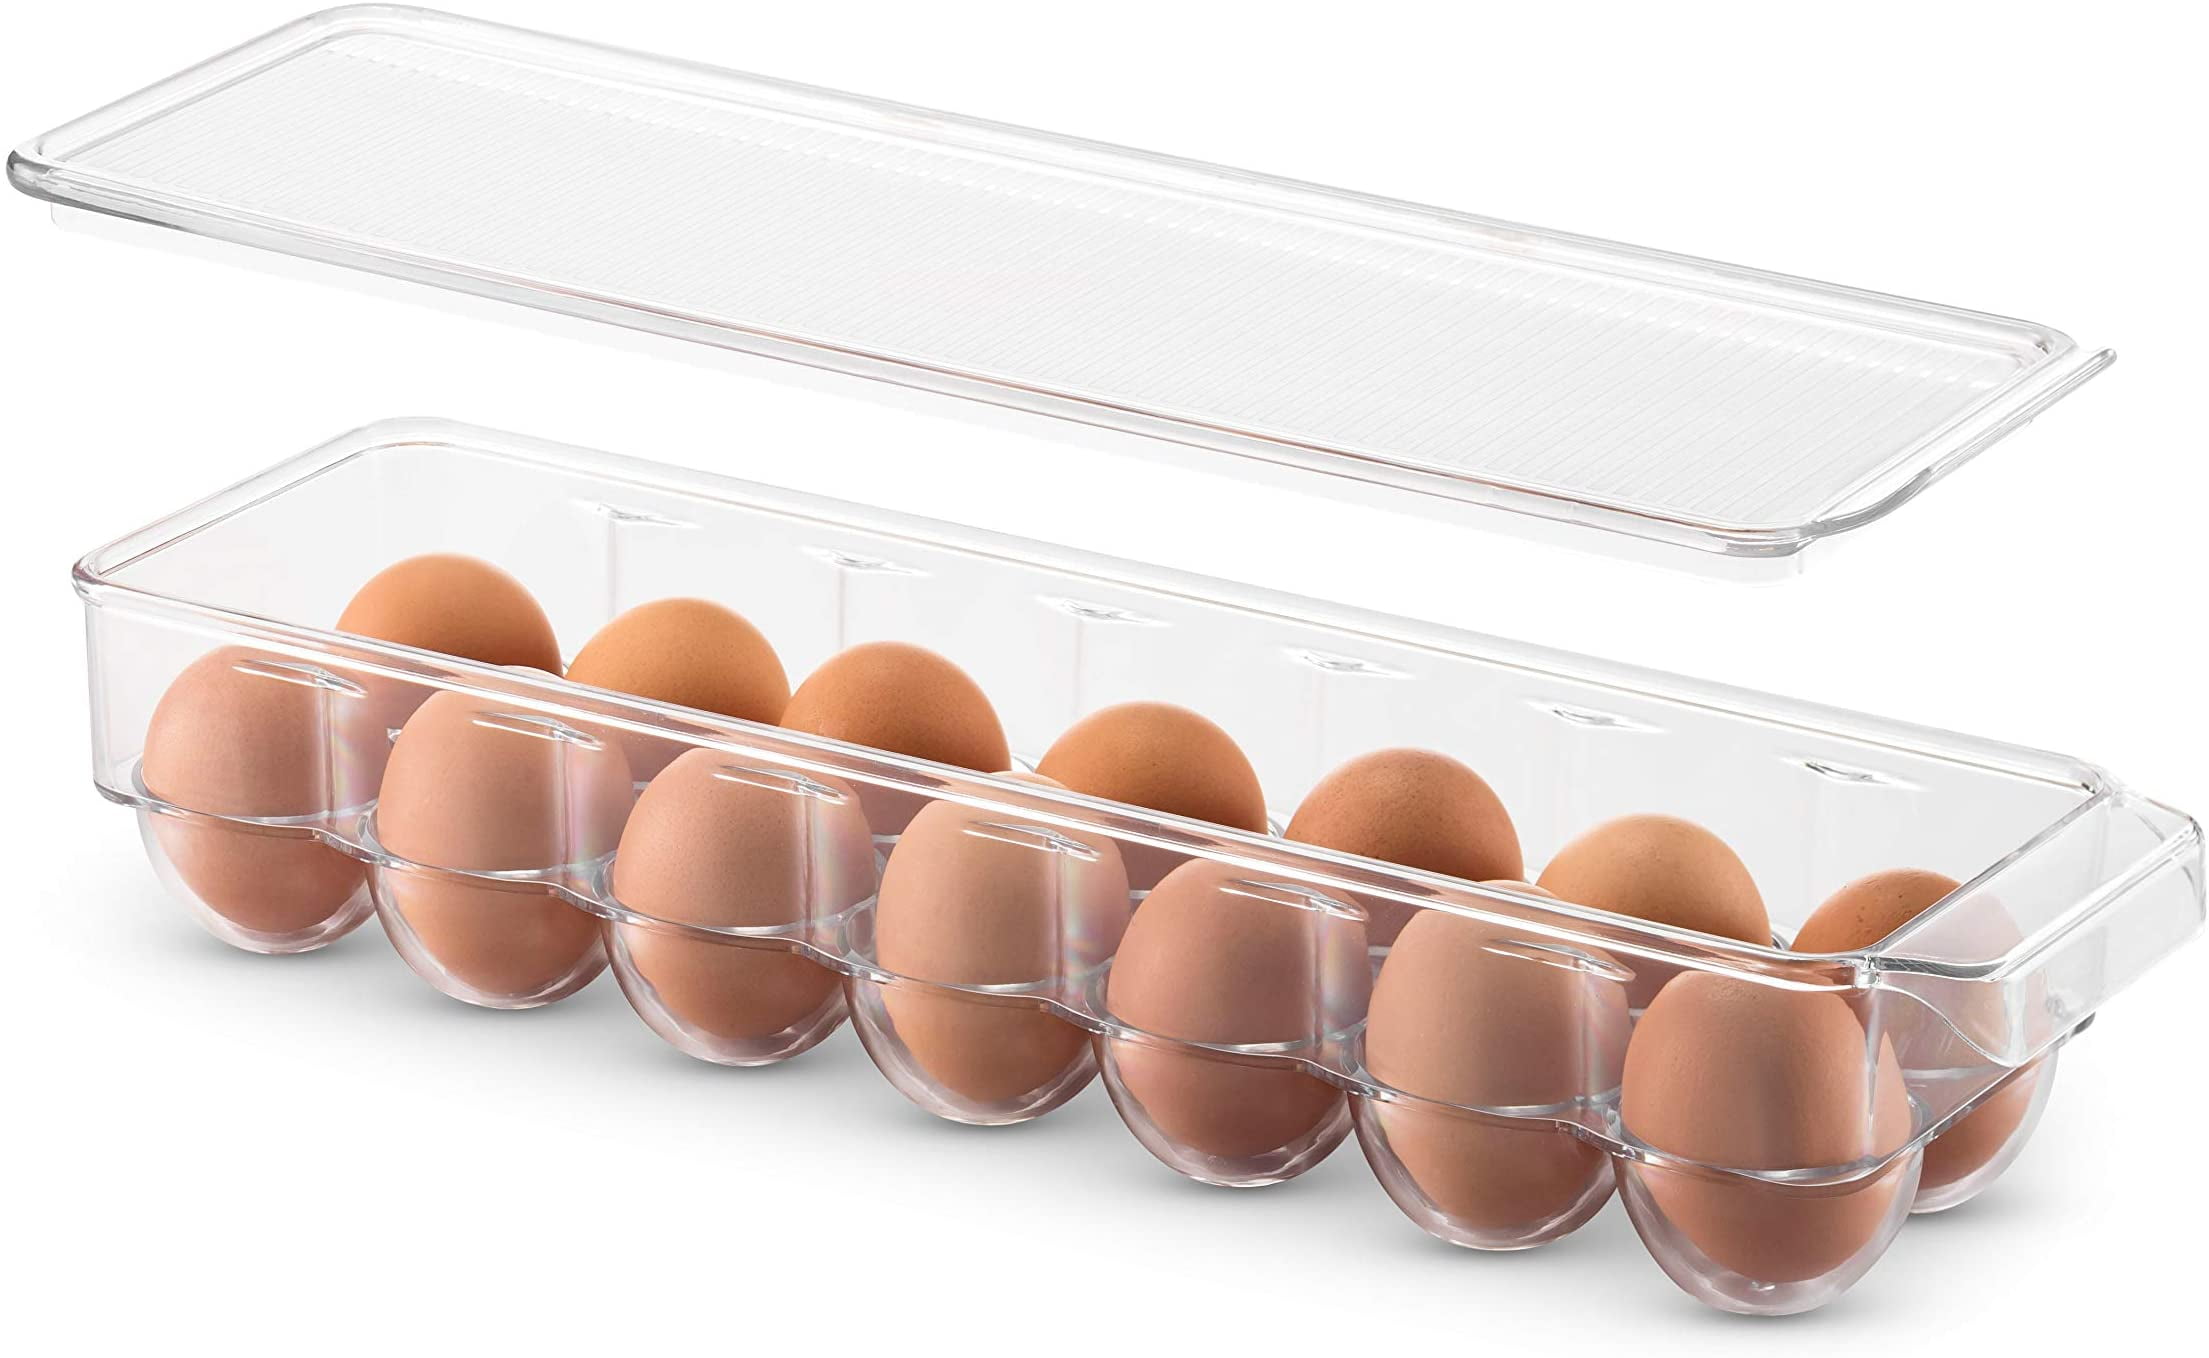 TankerStreet Frige Binz 14 Egg Tray PET with Built-in Handle Clear Fridge Egg Holder Storage Containers with Lid Stackable Egg Rack BPA-Free 